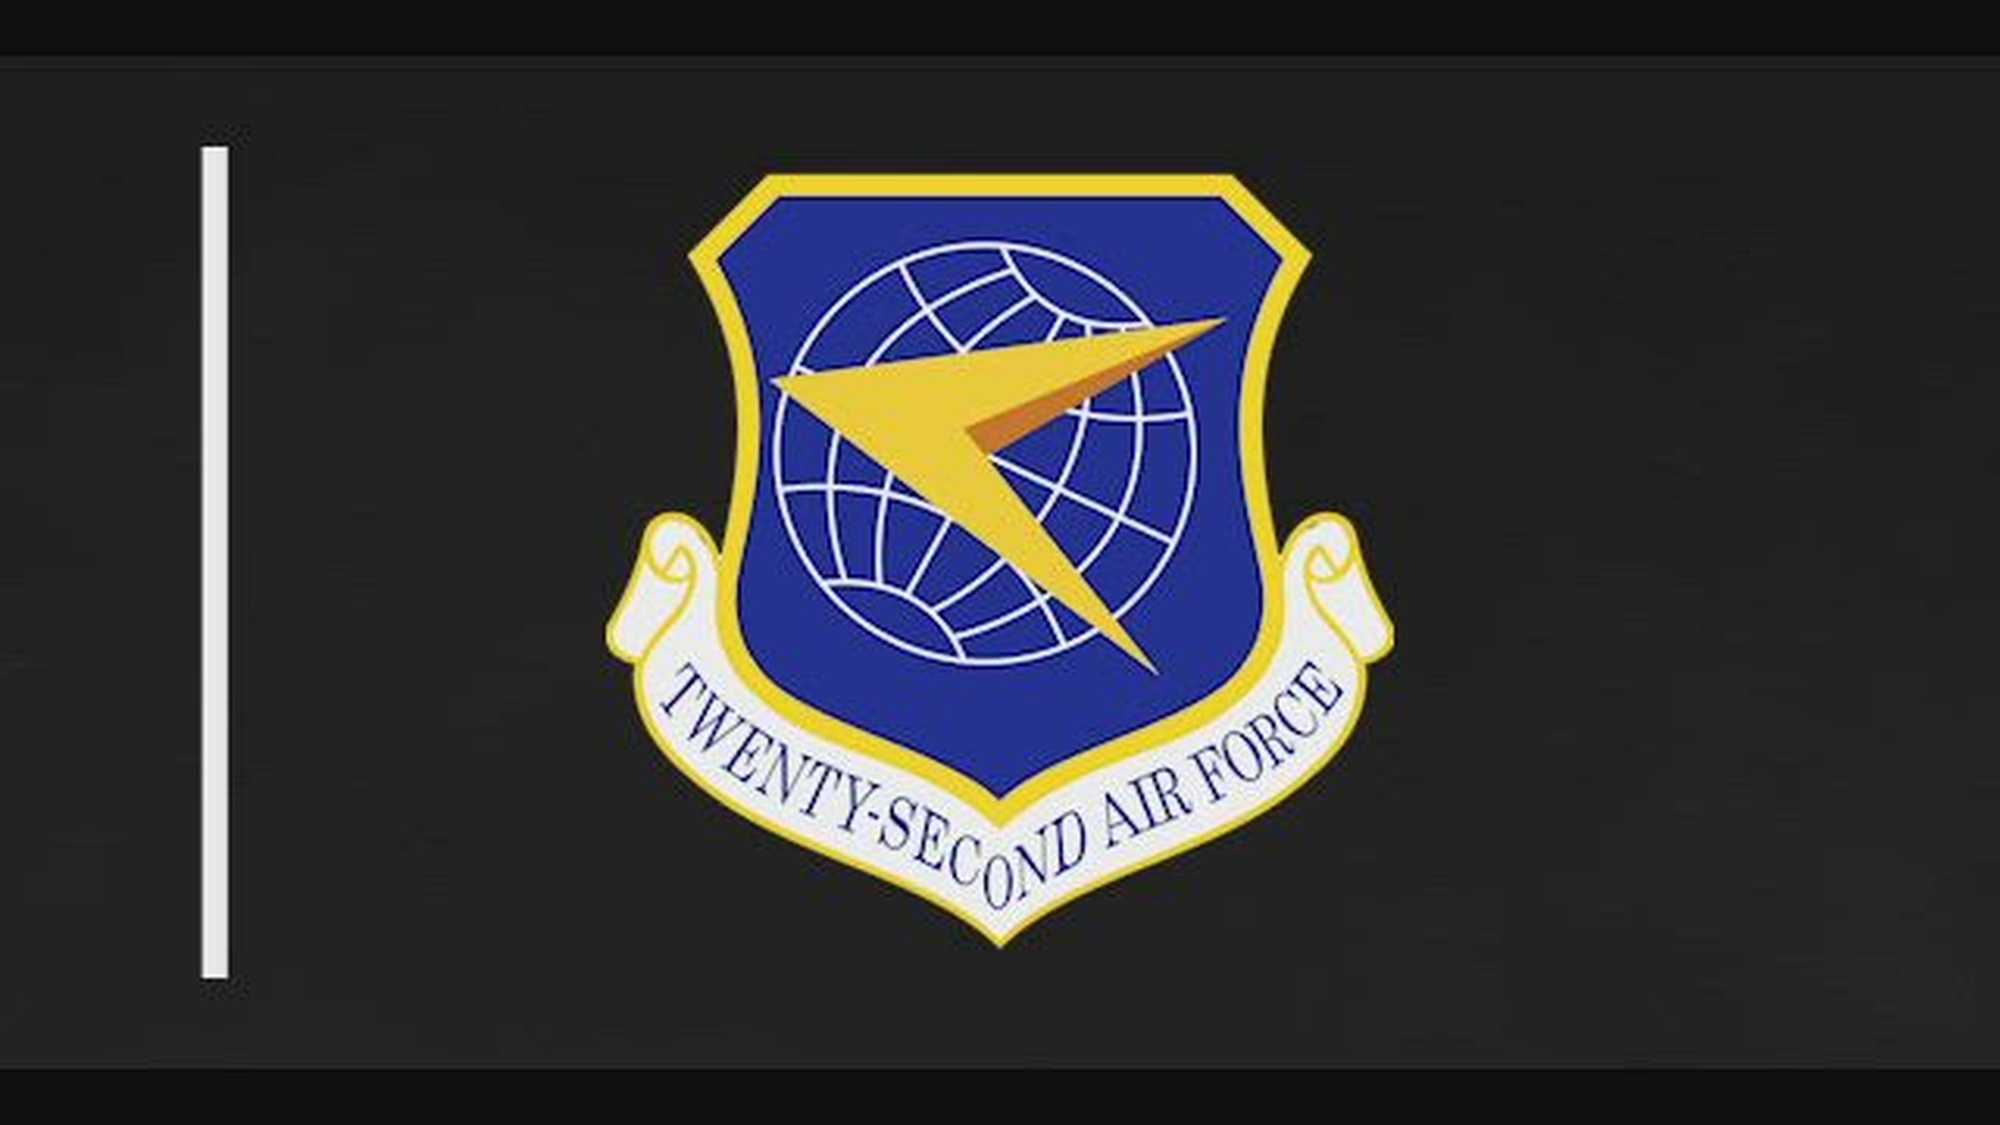 Video highlighting the mission and Reserve Citizen Airmen of 22nd Air Force. We are Second to None!